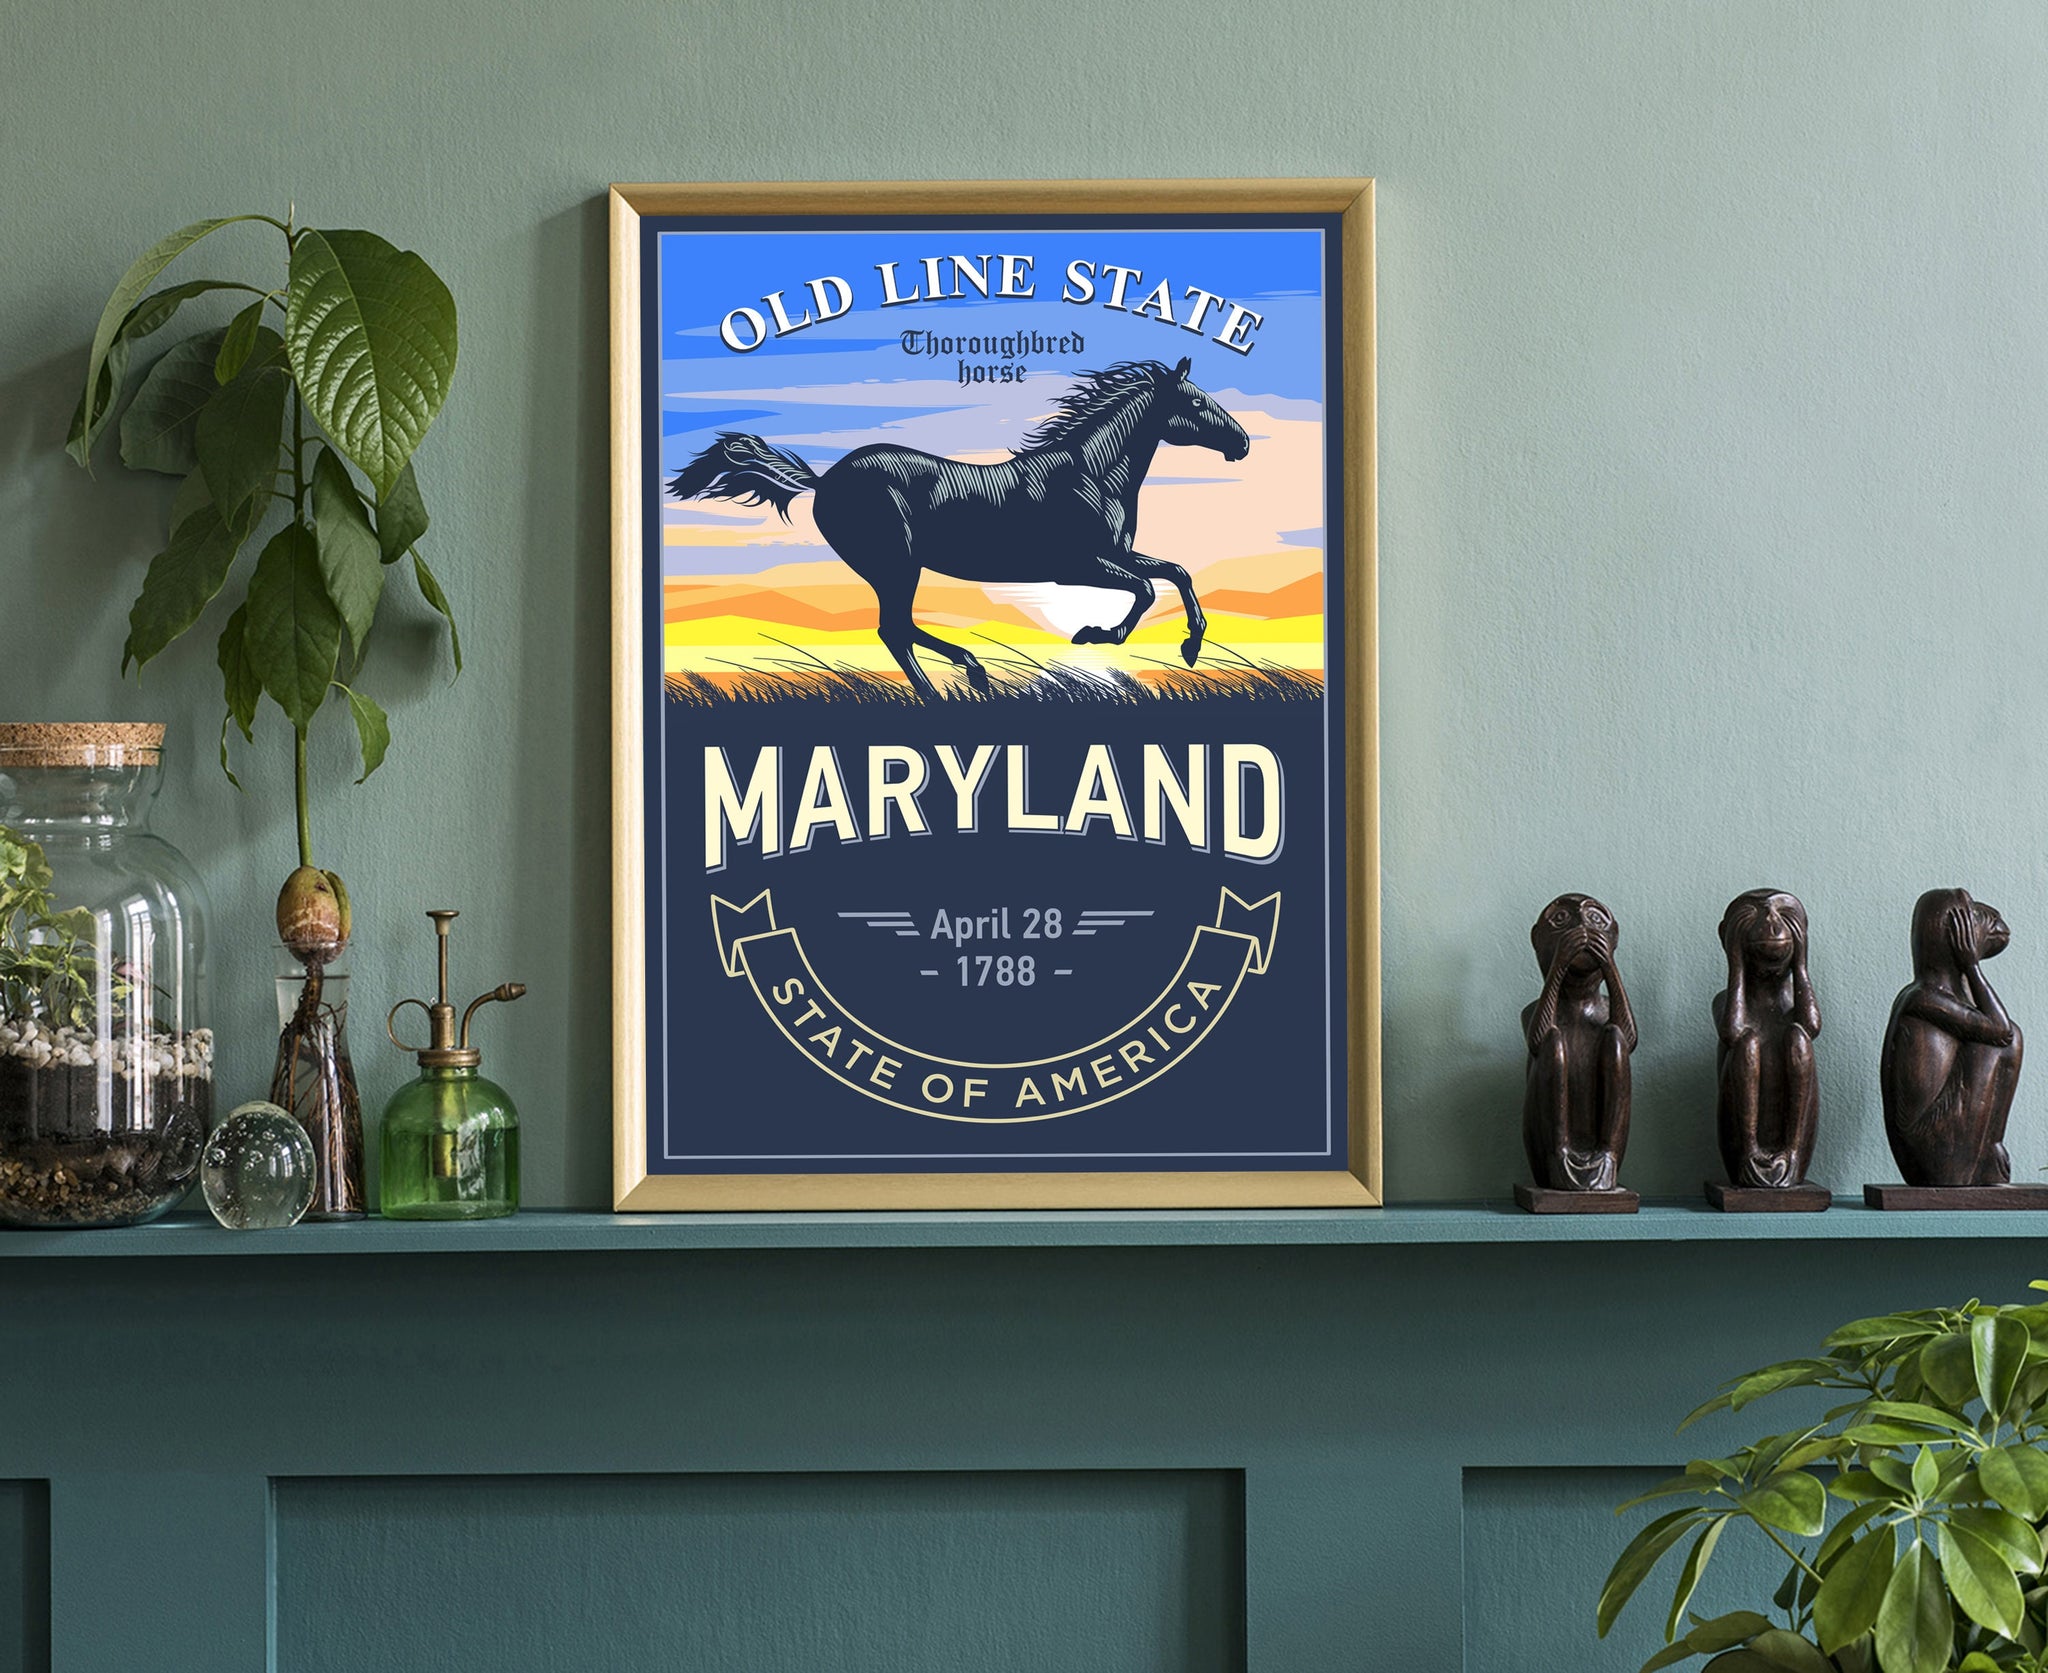 United States Poster, Maryland State Poster Print, Maryland State Emblem Poster, Retro Travel State Poster, Home Wall Art, Office Wall Art